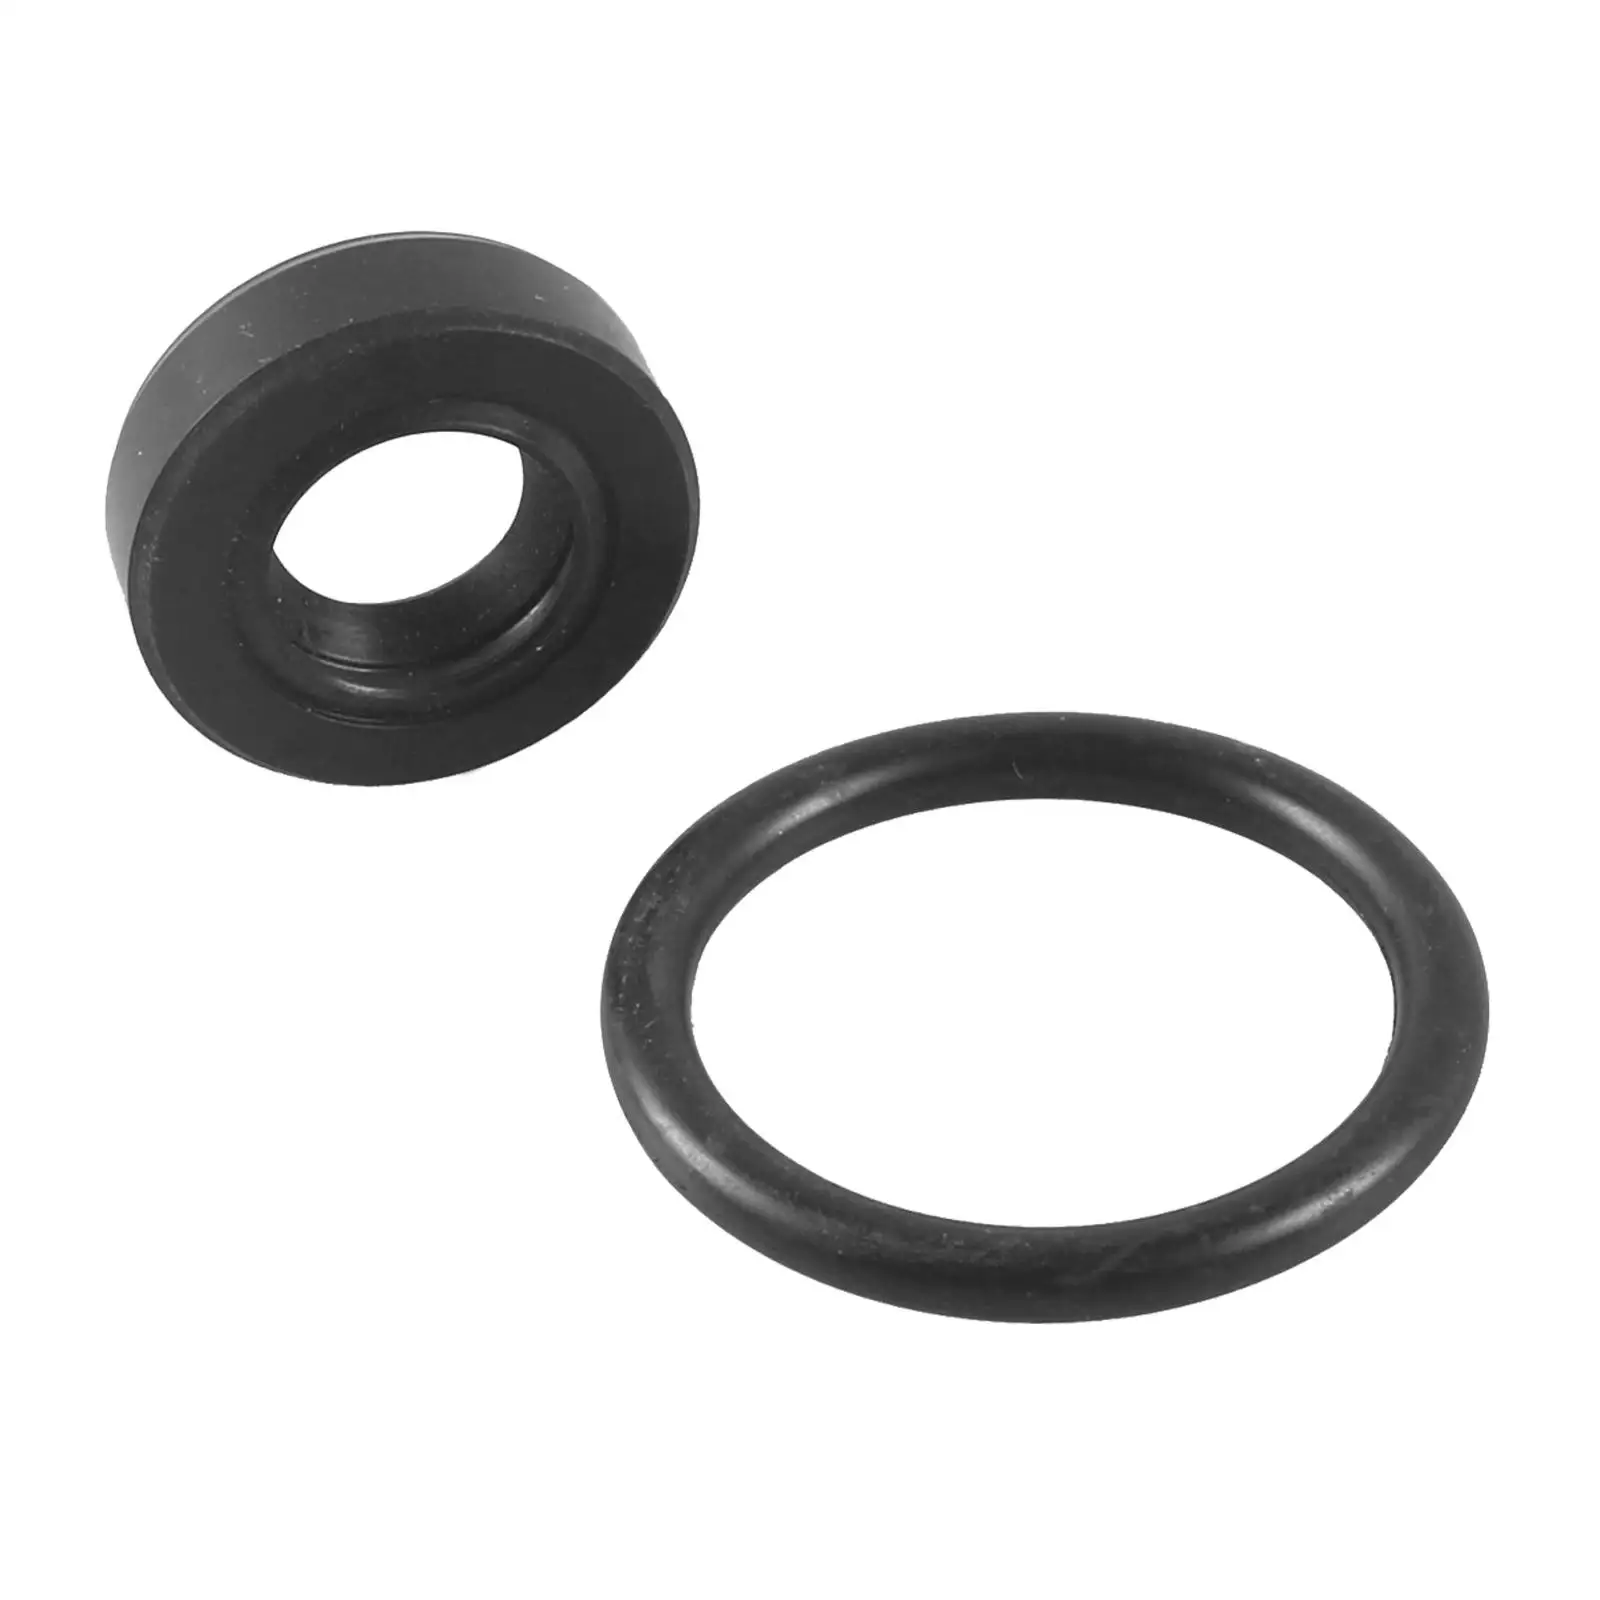 Oil Distributor Seal Replace, Oil Leaks, O Kit, Car Replacement BH3888E0